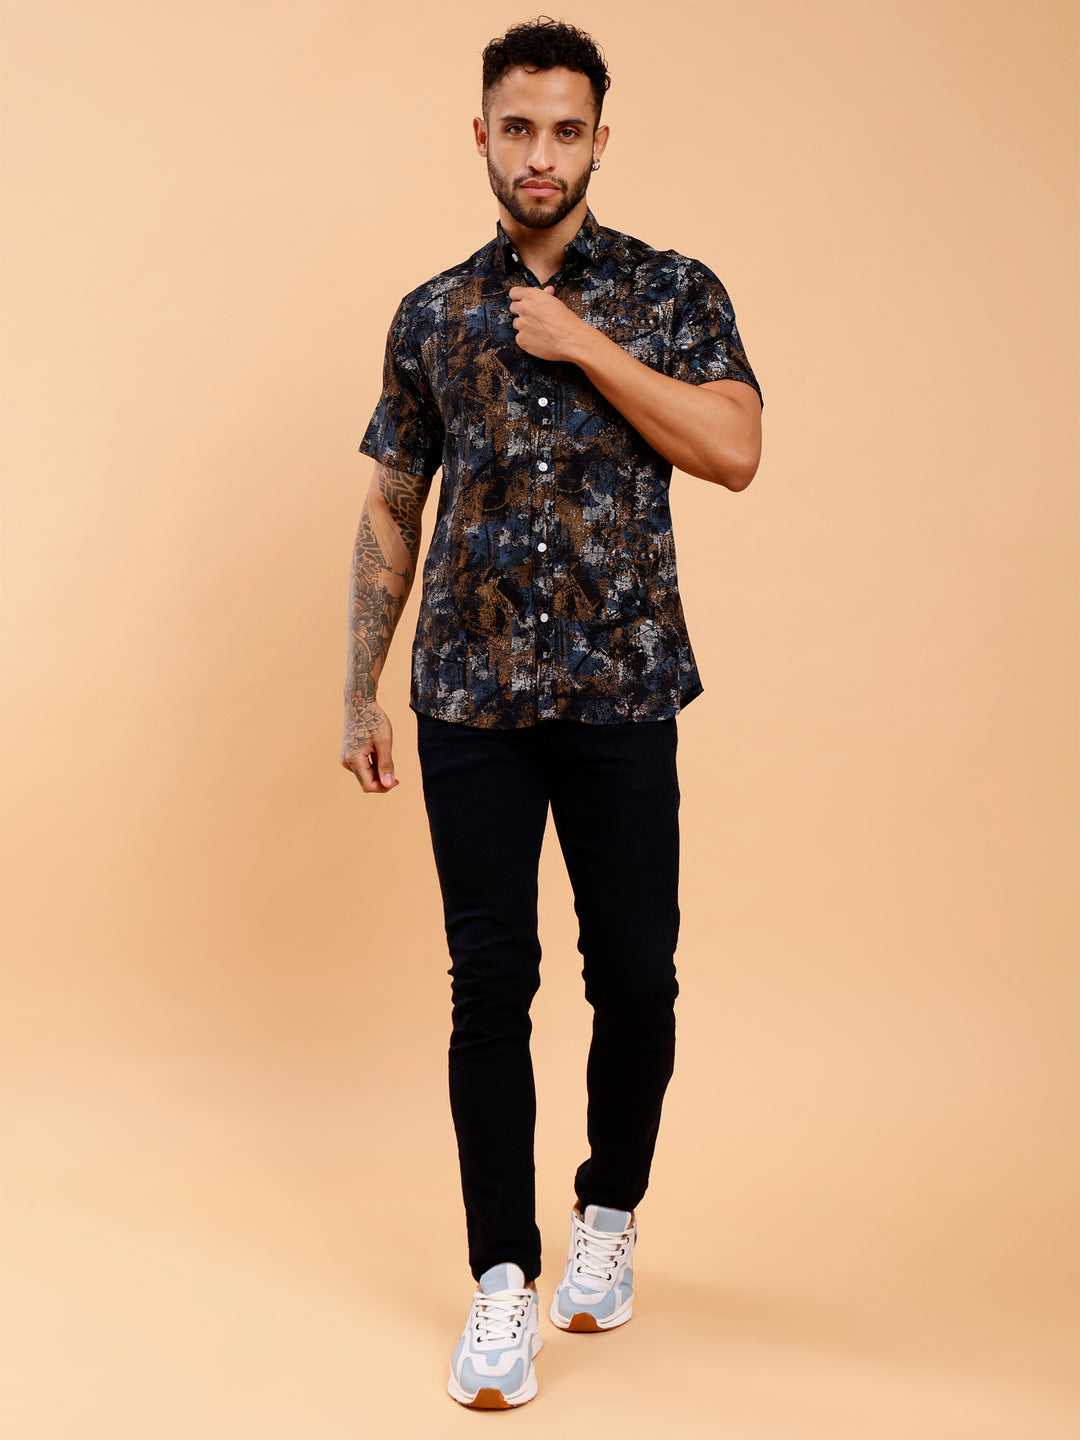 Grit Abstract Print Blue Brown Shirt